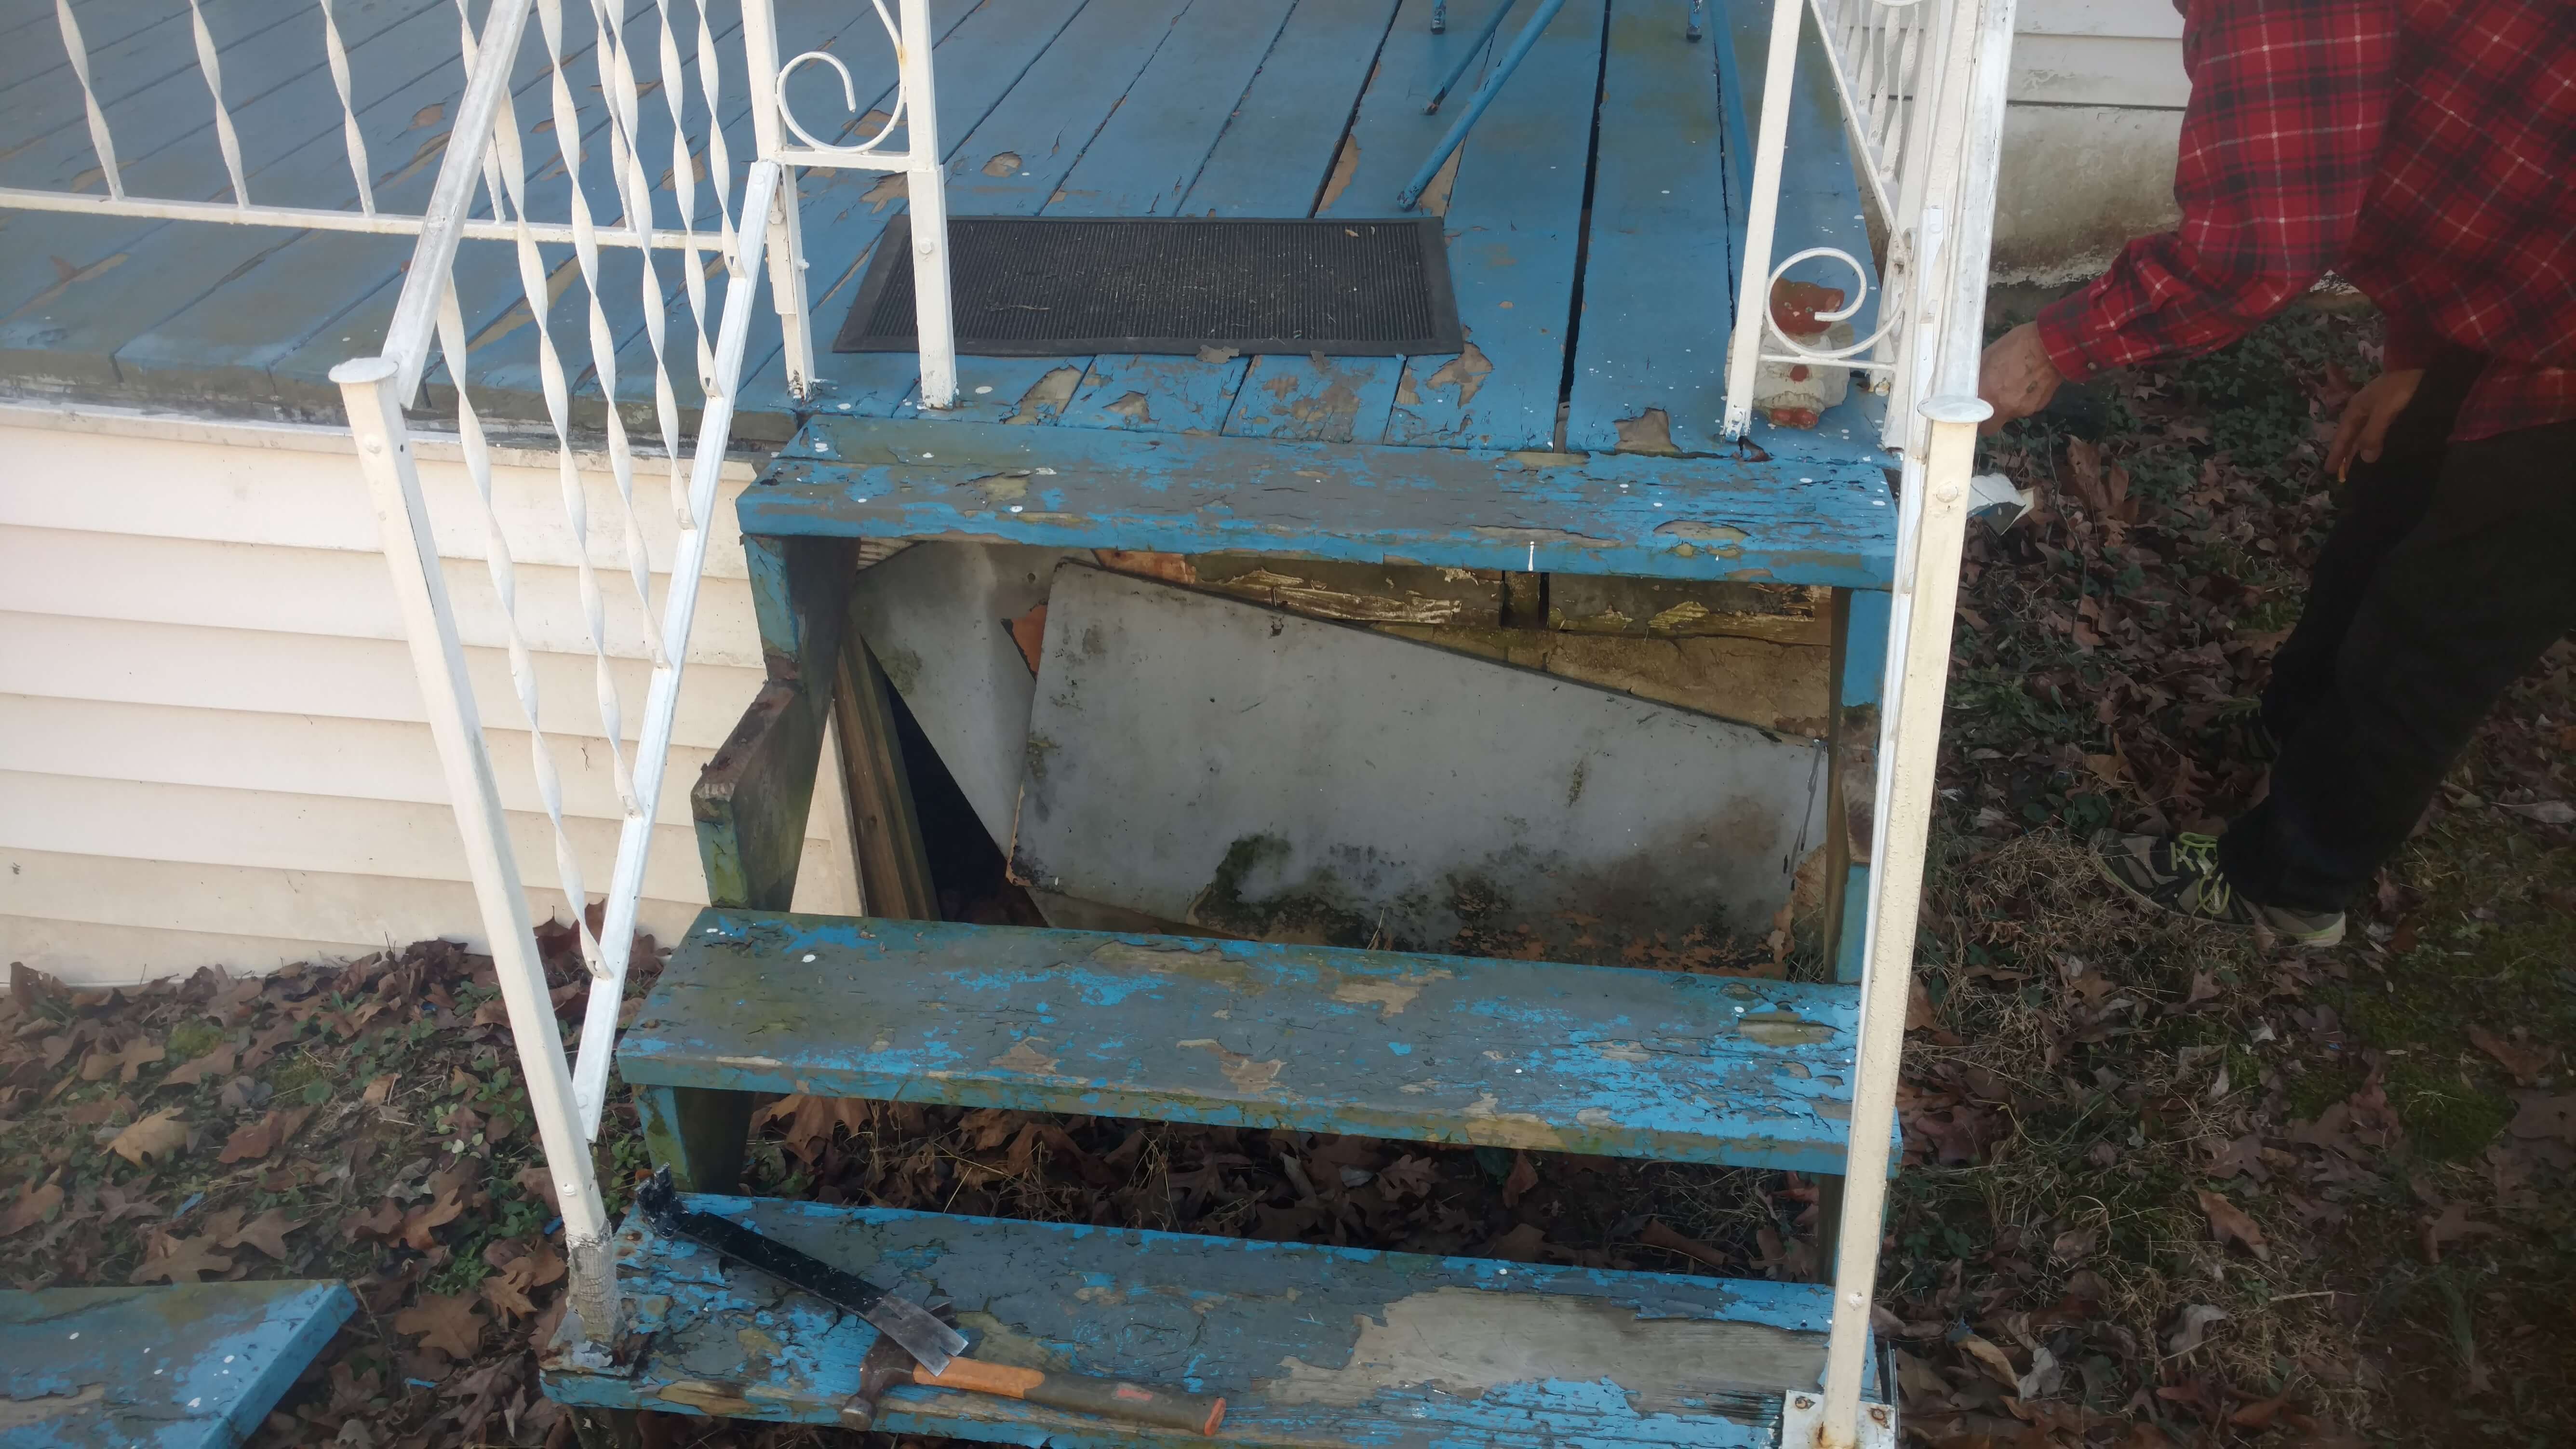 Worn and damaged stairs and a small porch